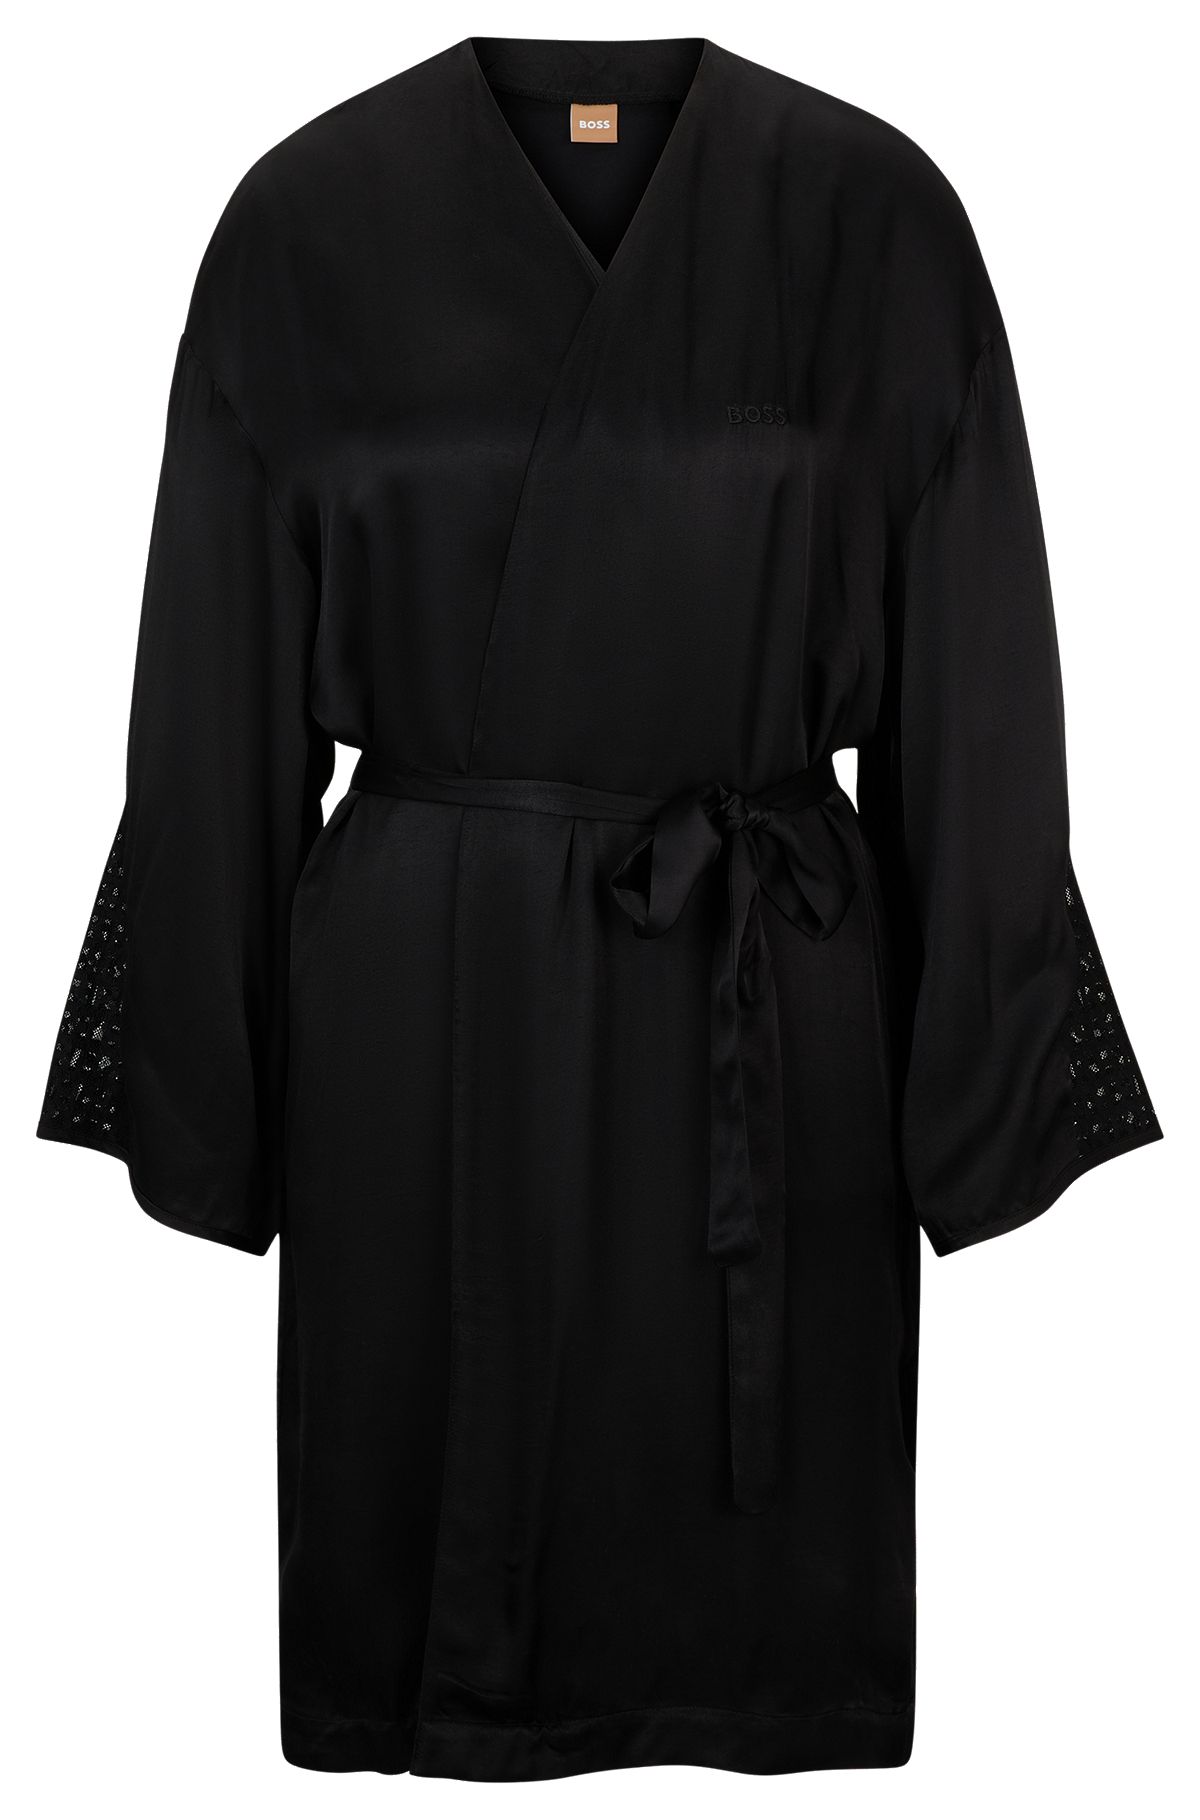 Satin dressing gown with monogram details, Black